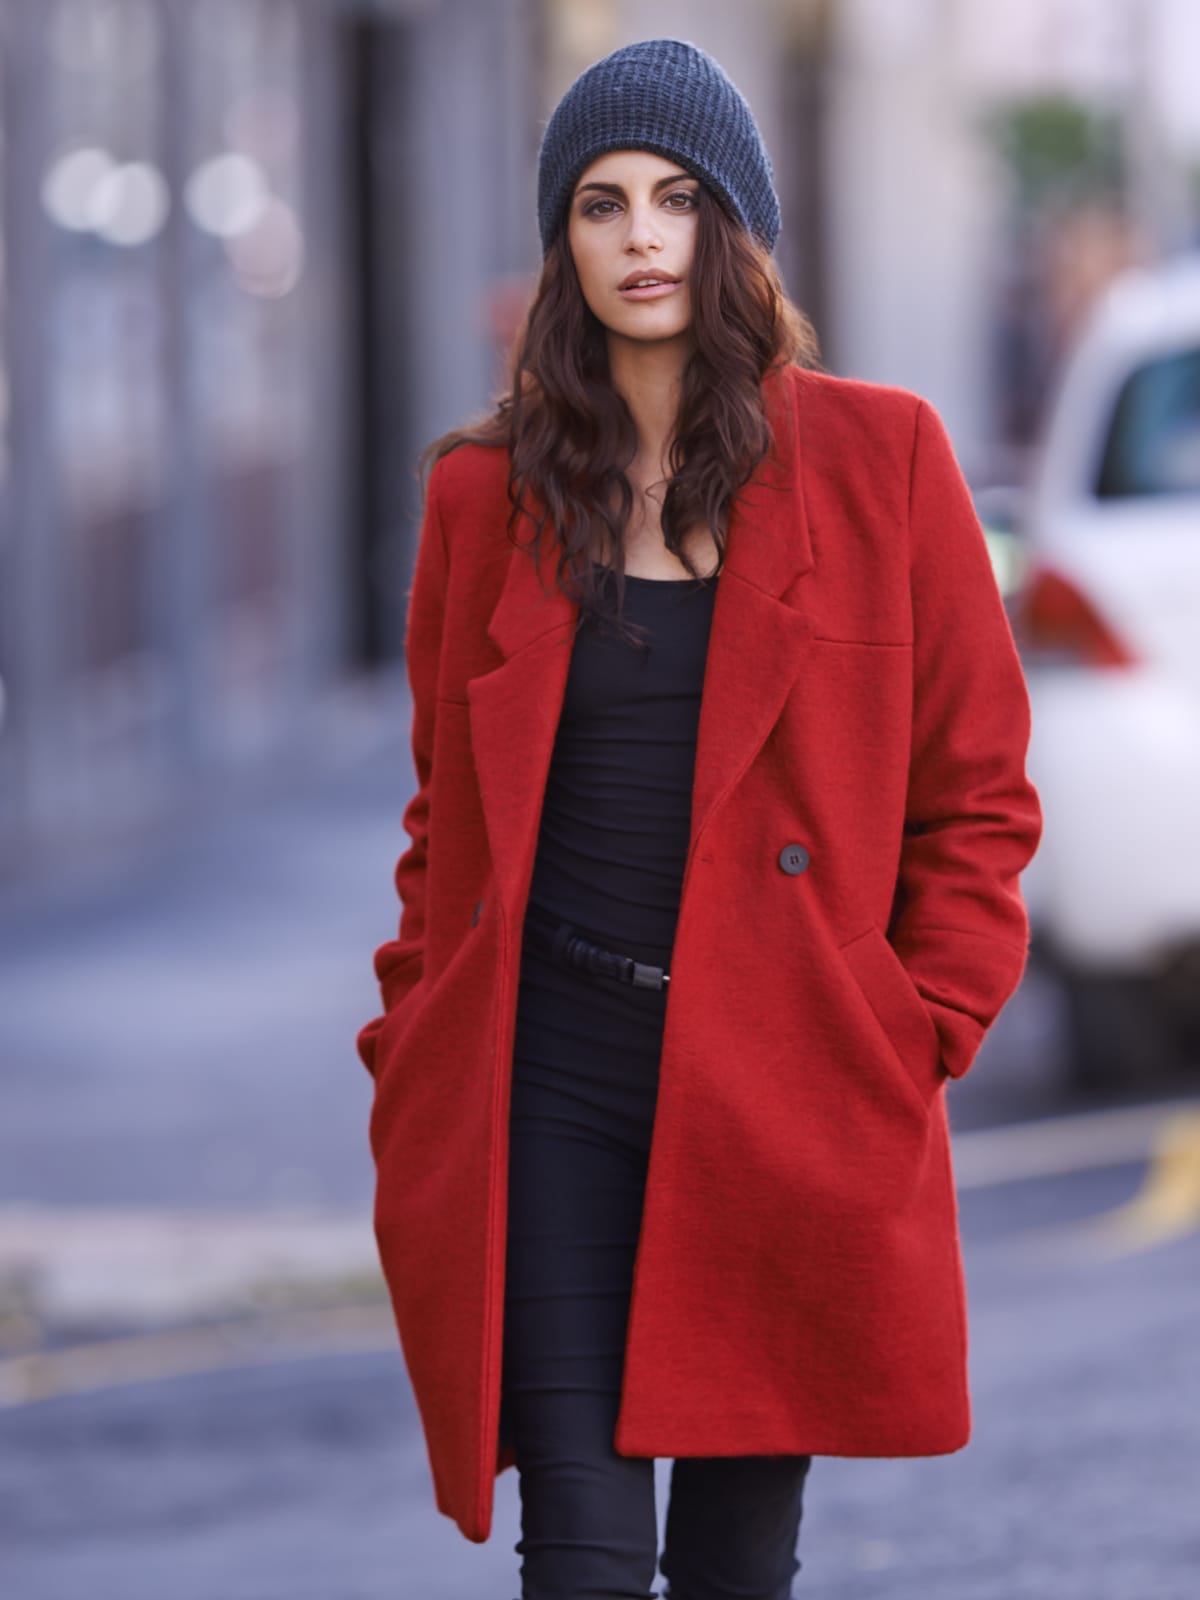 Portrait of a beautiful young woman out and about in the city wearing a red coatigan